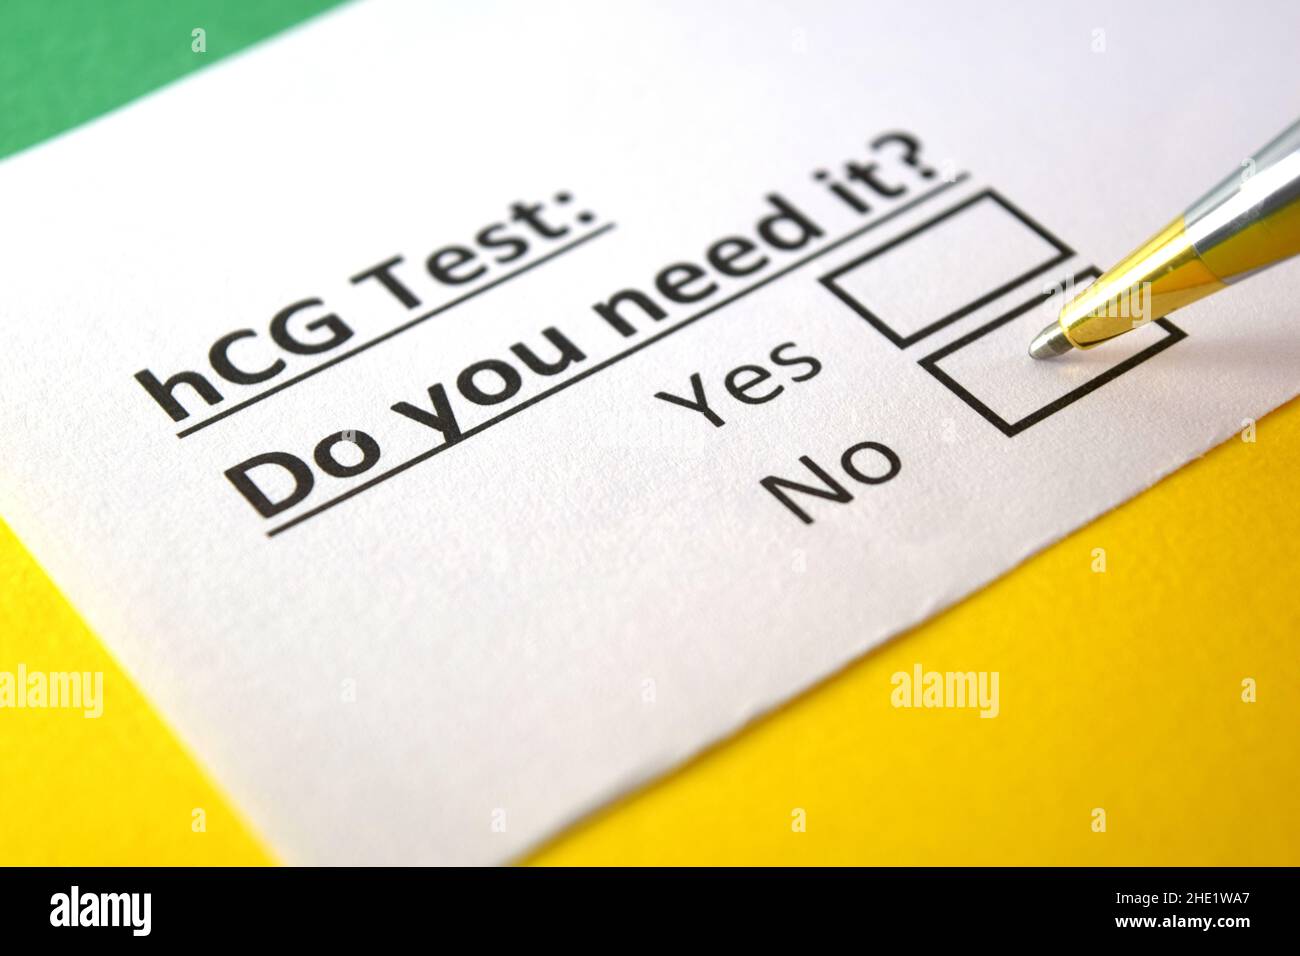 One person is answering question about hCG test. Stock Photo